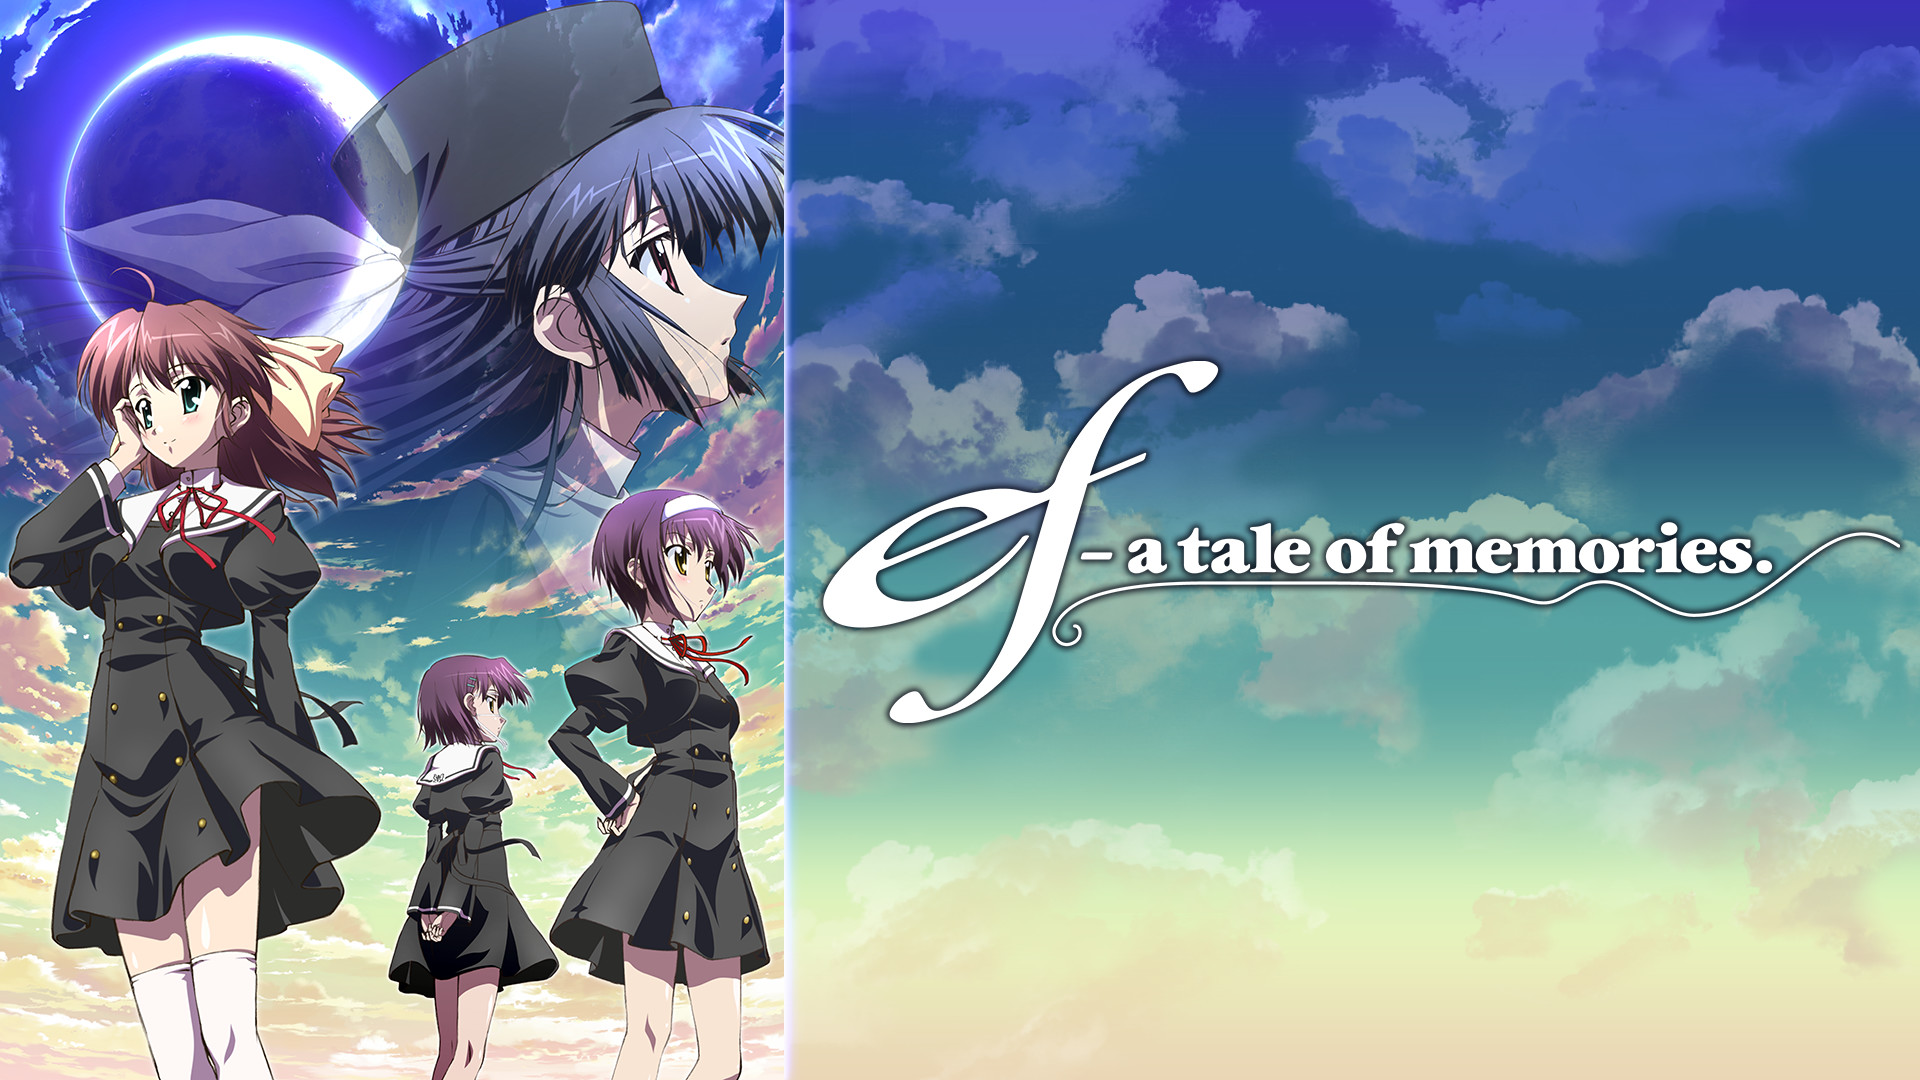 Ef A Tale Of Memories アニメ動画見放題 Dアニメストア